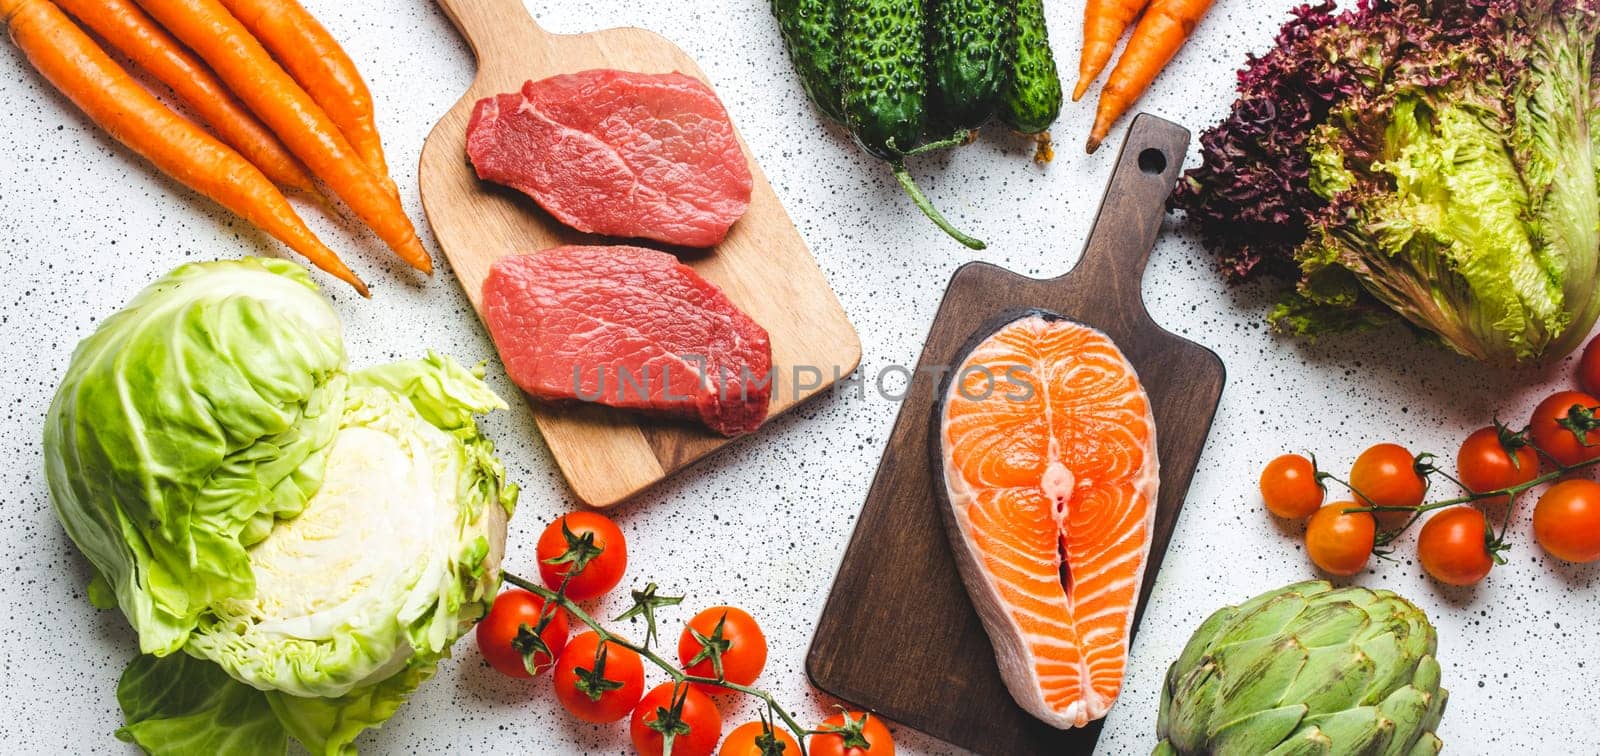 Various food raw products: vegetables, beef meat steak, fish salmon fillet on wooden cutting boards, white rustic table top view. Healthy food ingredients background, diet and balanced nutrition by its_al_dente